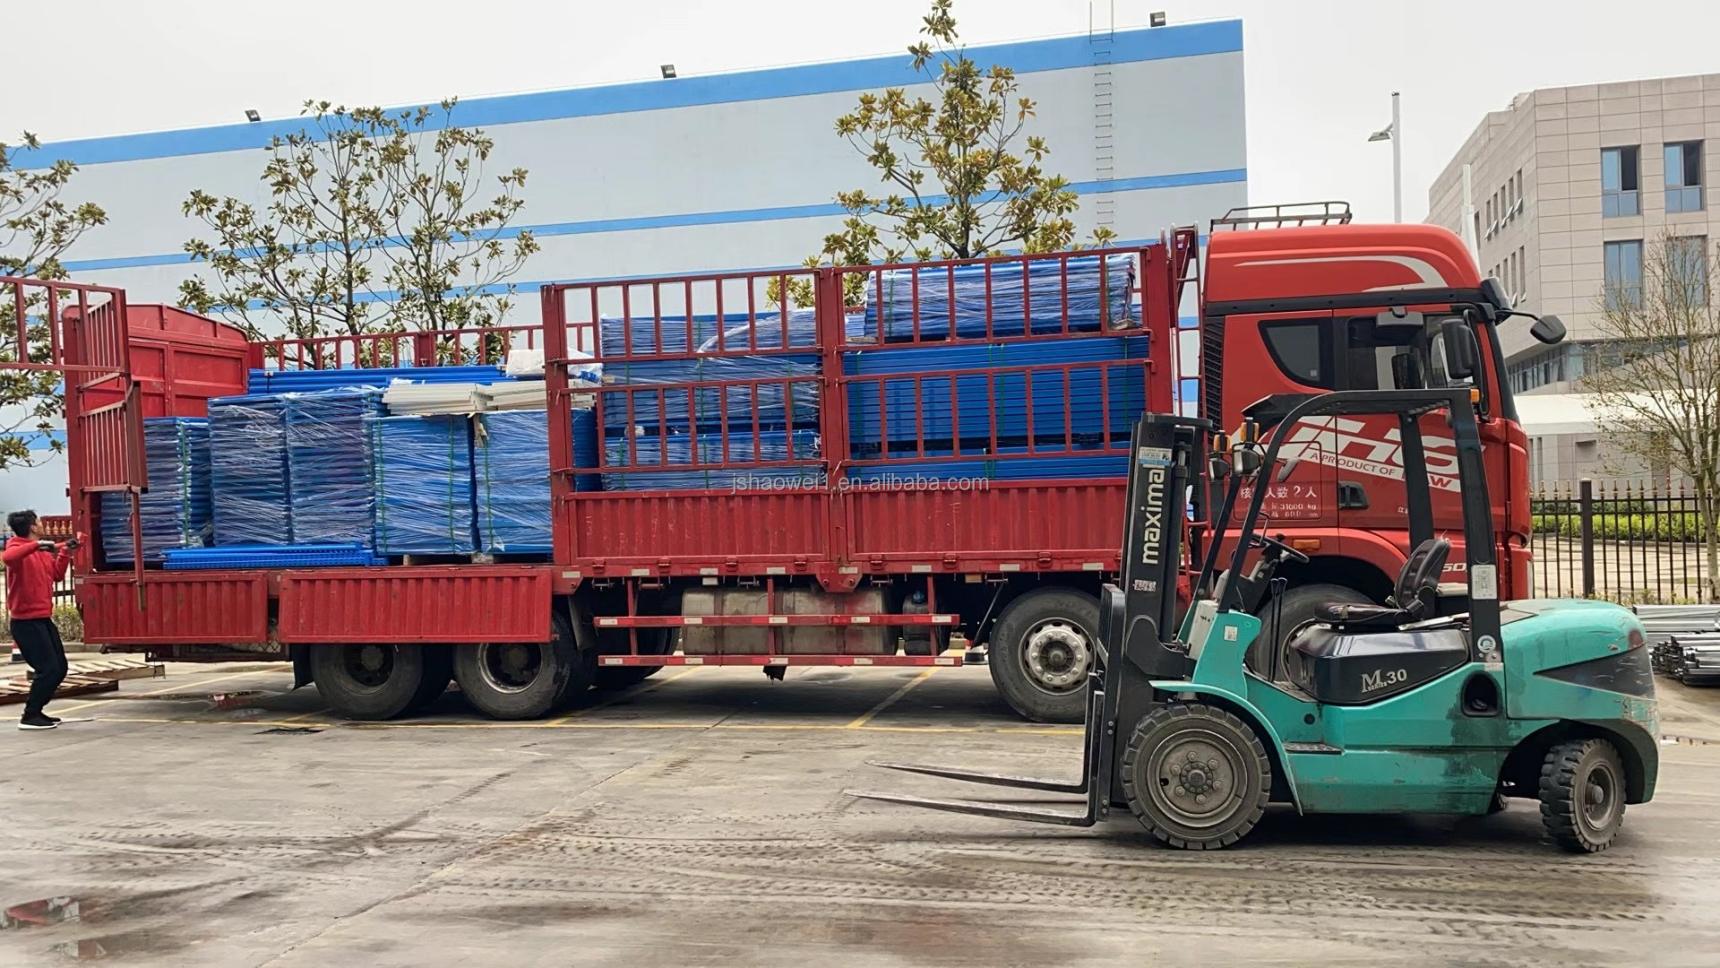 Manufacturer logistics trolley cage car turnover car warehouse  metal wire mesh cargo storage roll cage